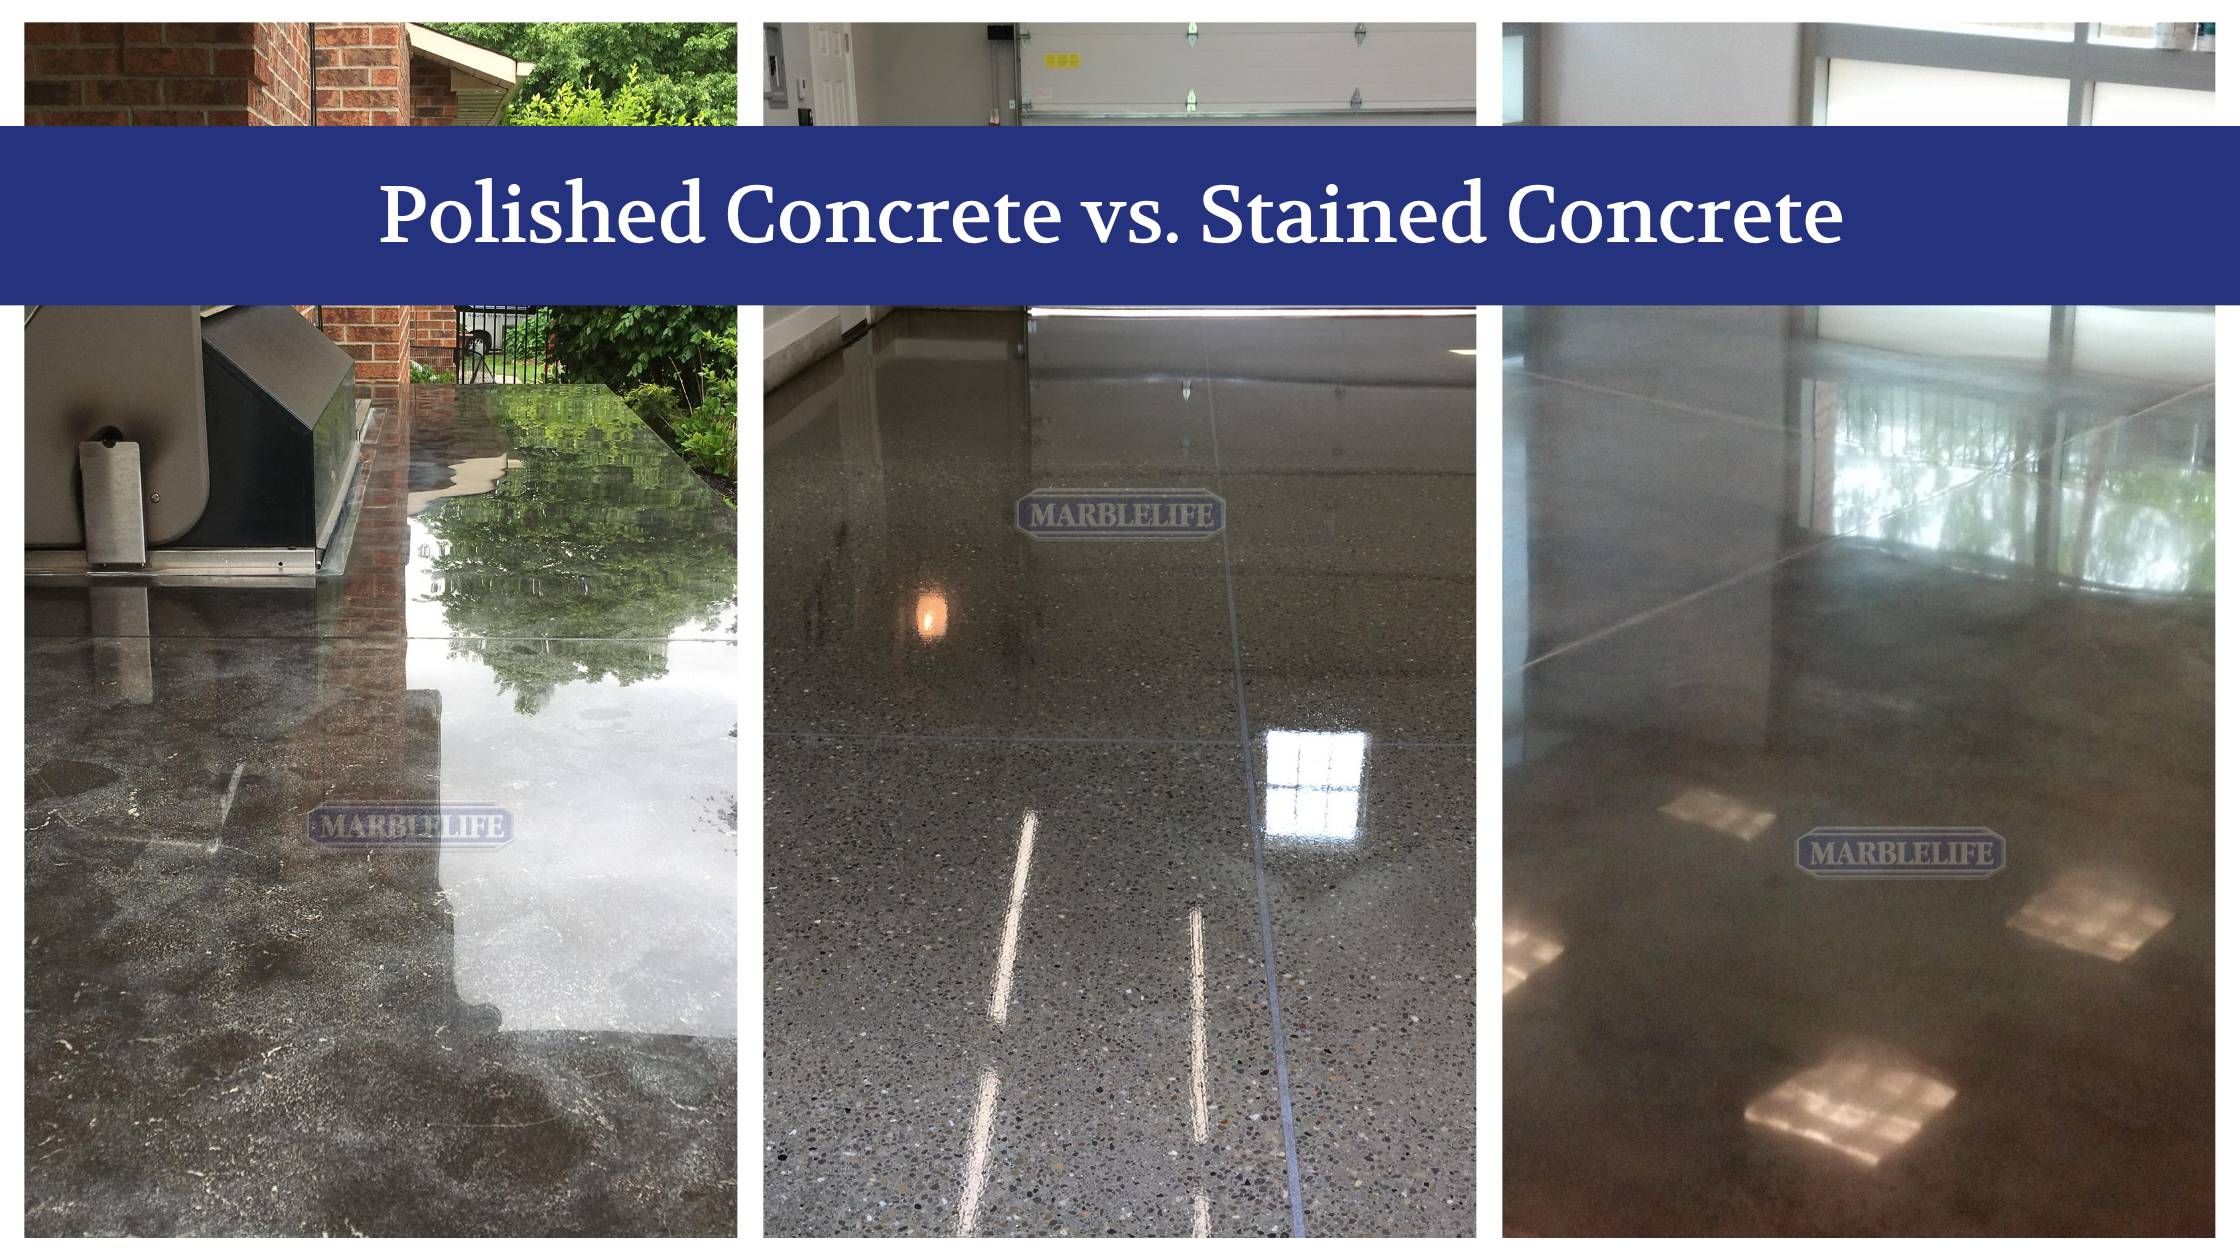 Polished Concrete vs. Stained Concrete - Post